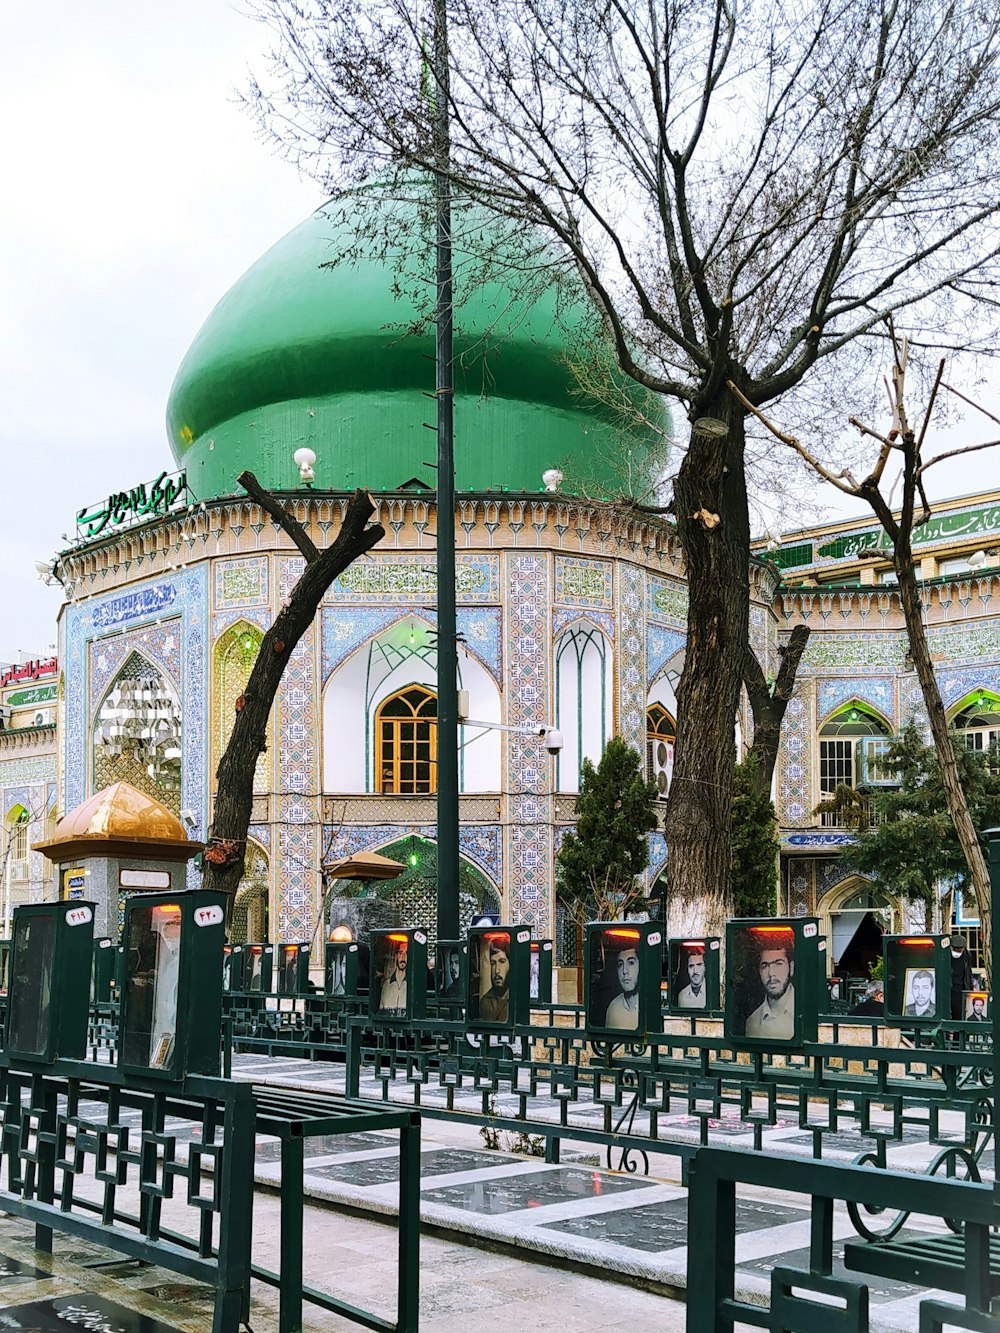 a building with a green dome on top of it